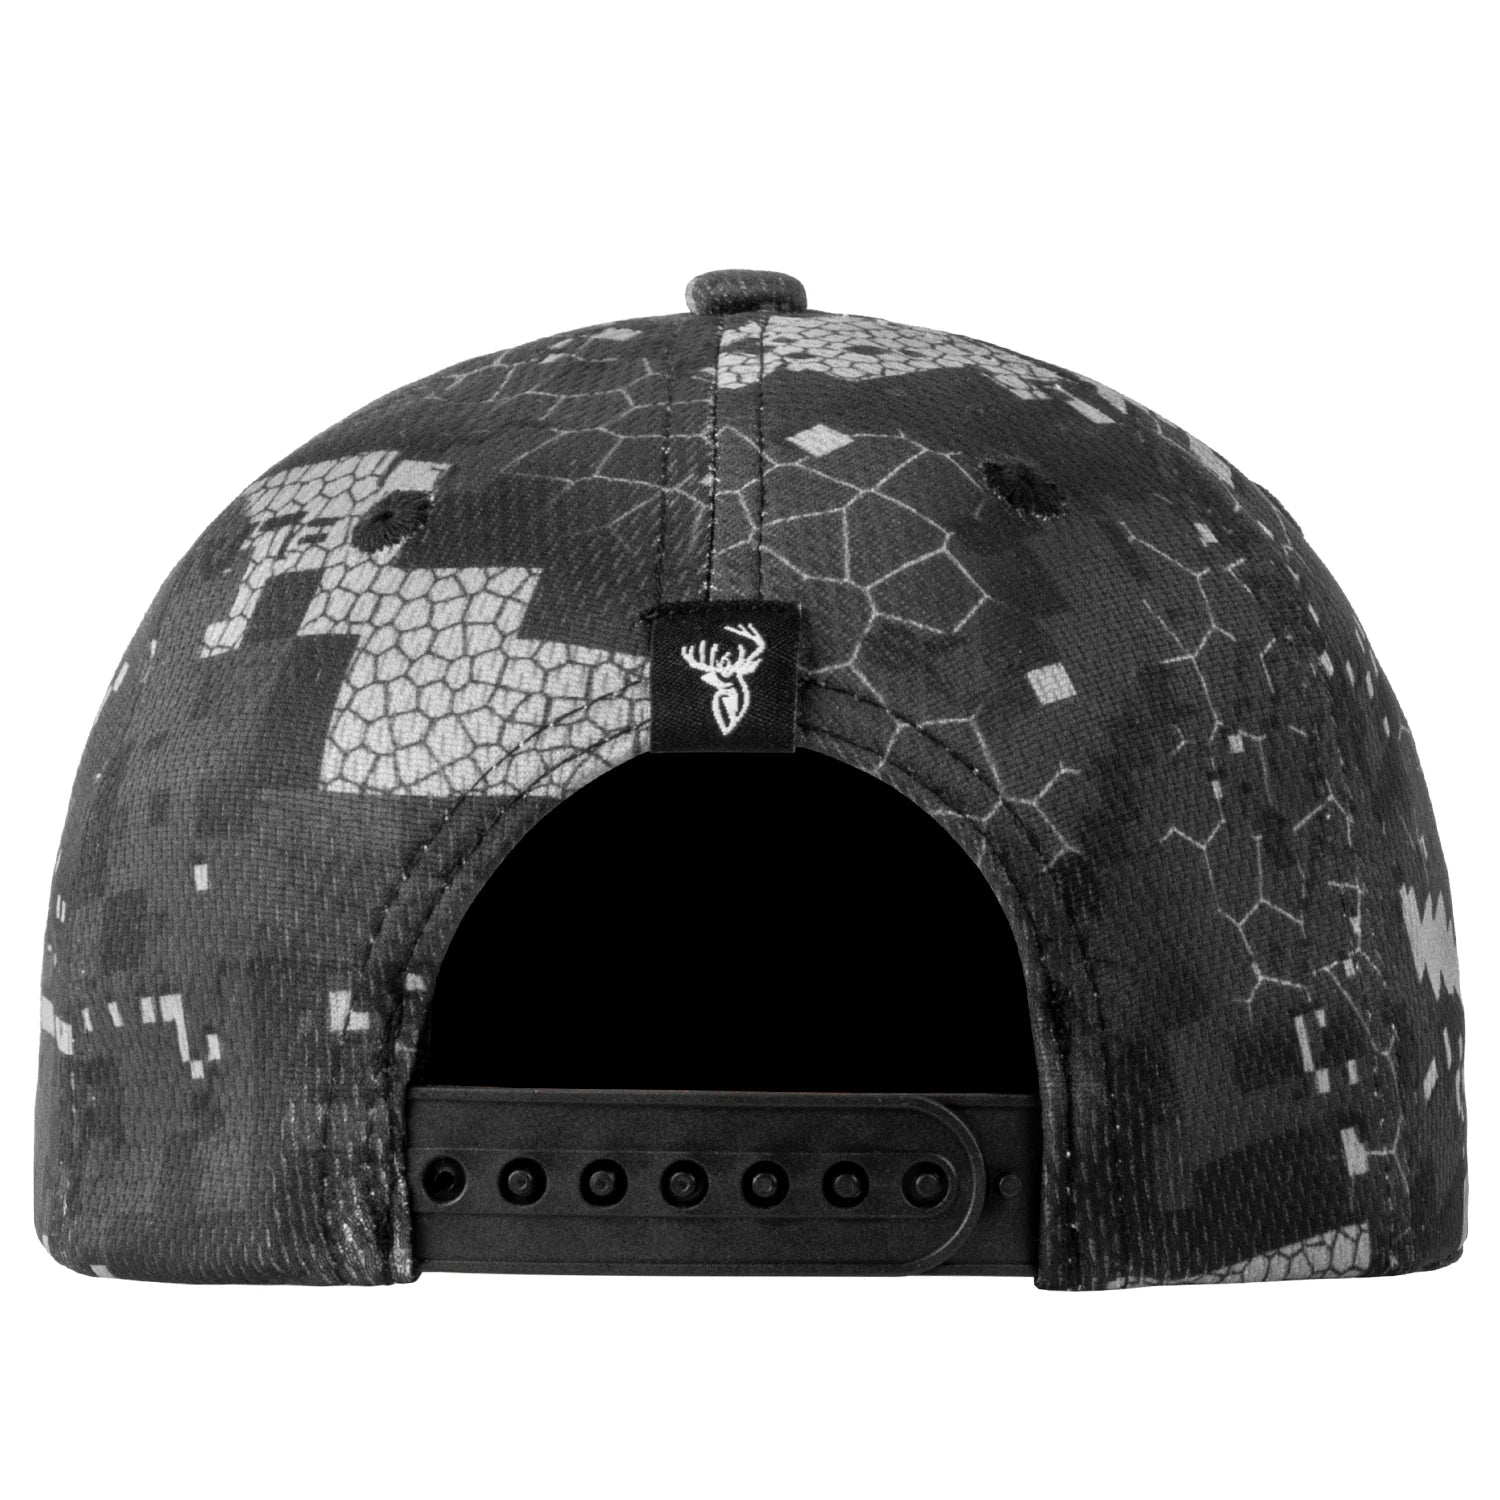 Hunters Element Patch Cap - Desolve Blak -  - Mansfield Hunting & Fishing - Products to prepare for Corona Virus